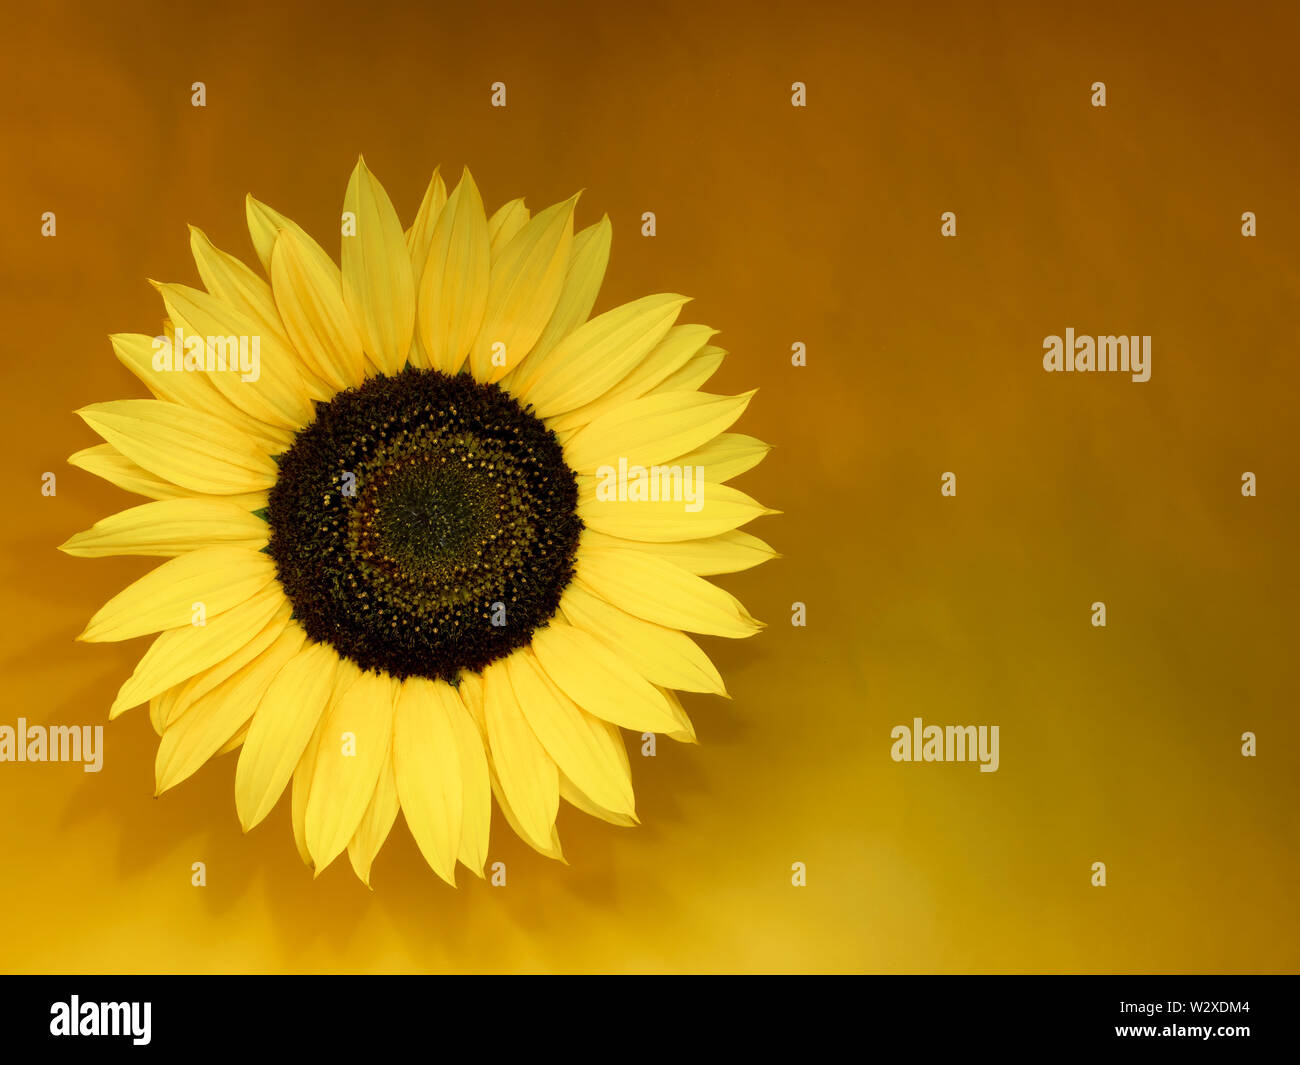 Sunflower flower, light painted, on hot yellow and orange background with copyspace. Looks 3d. Stock Photo